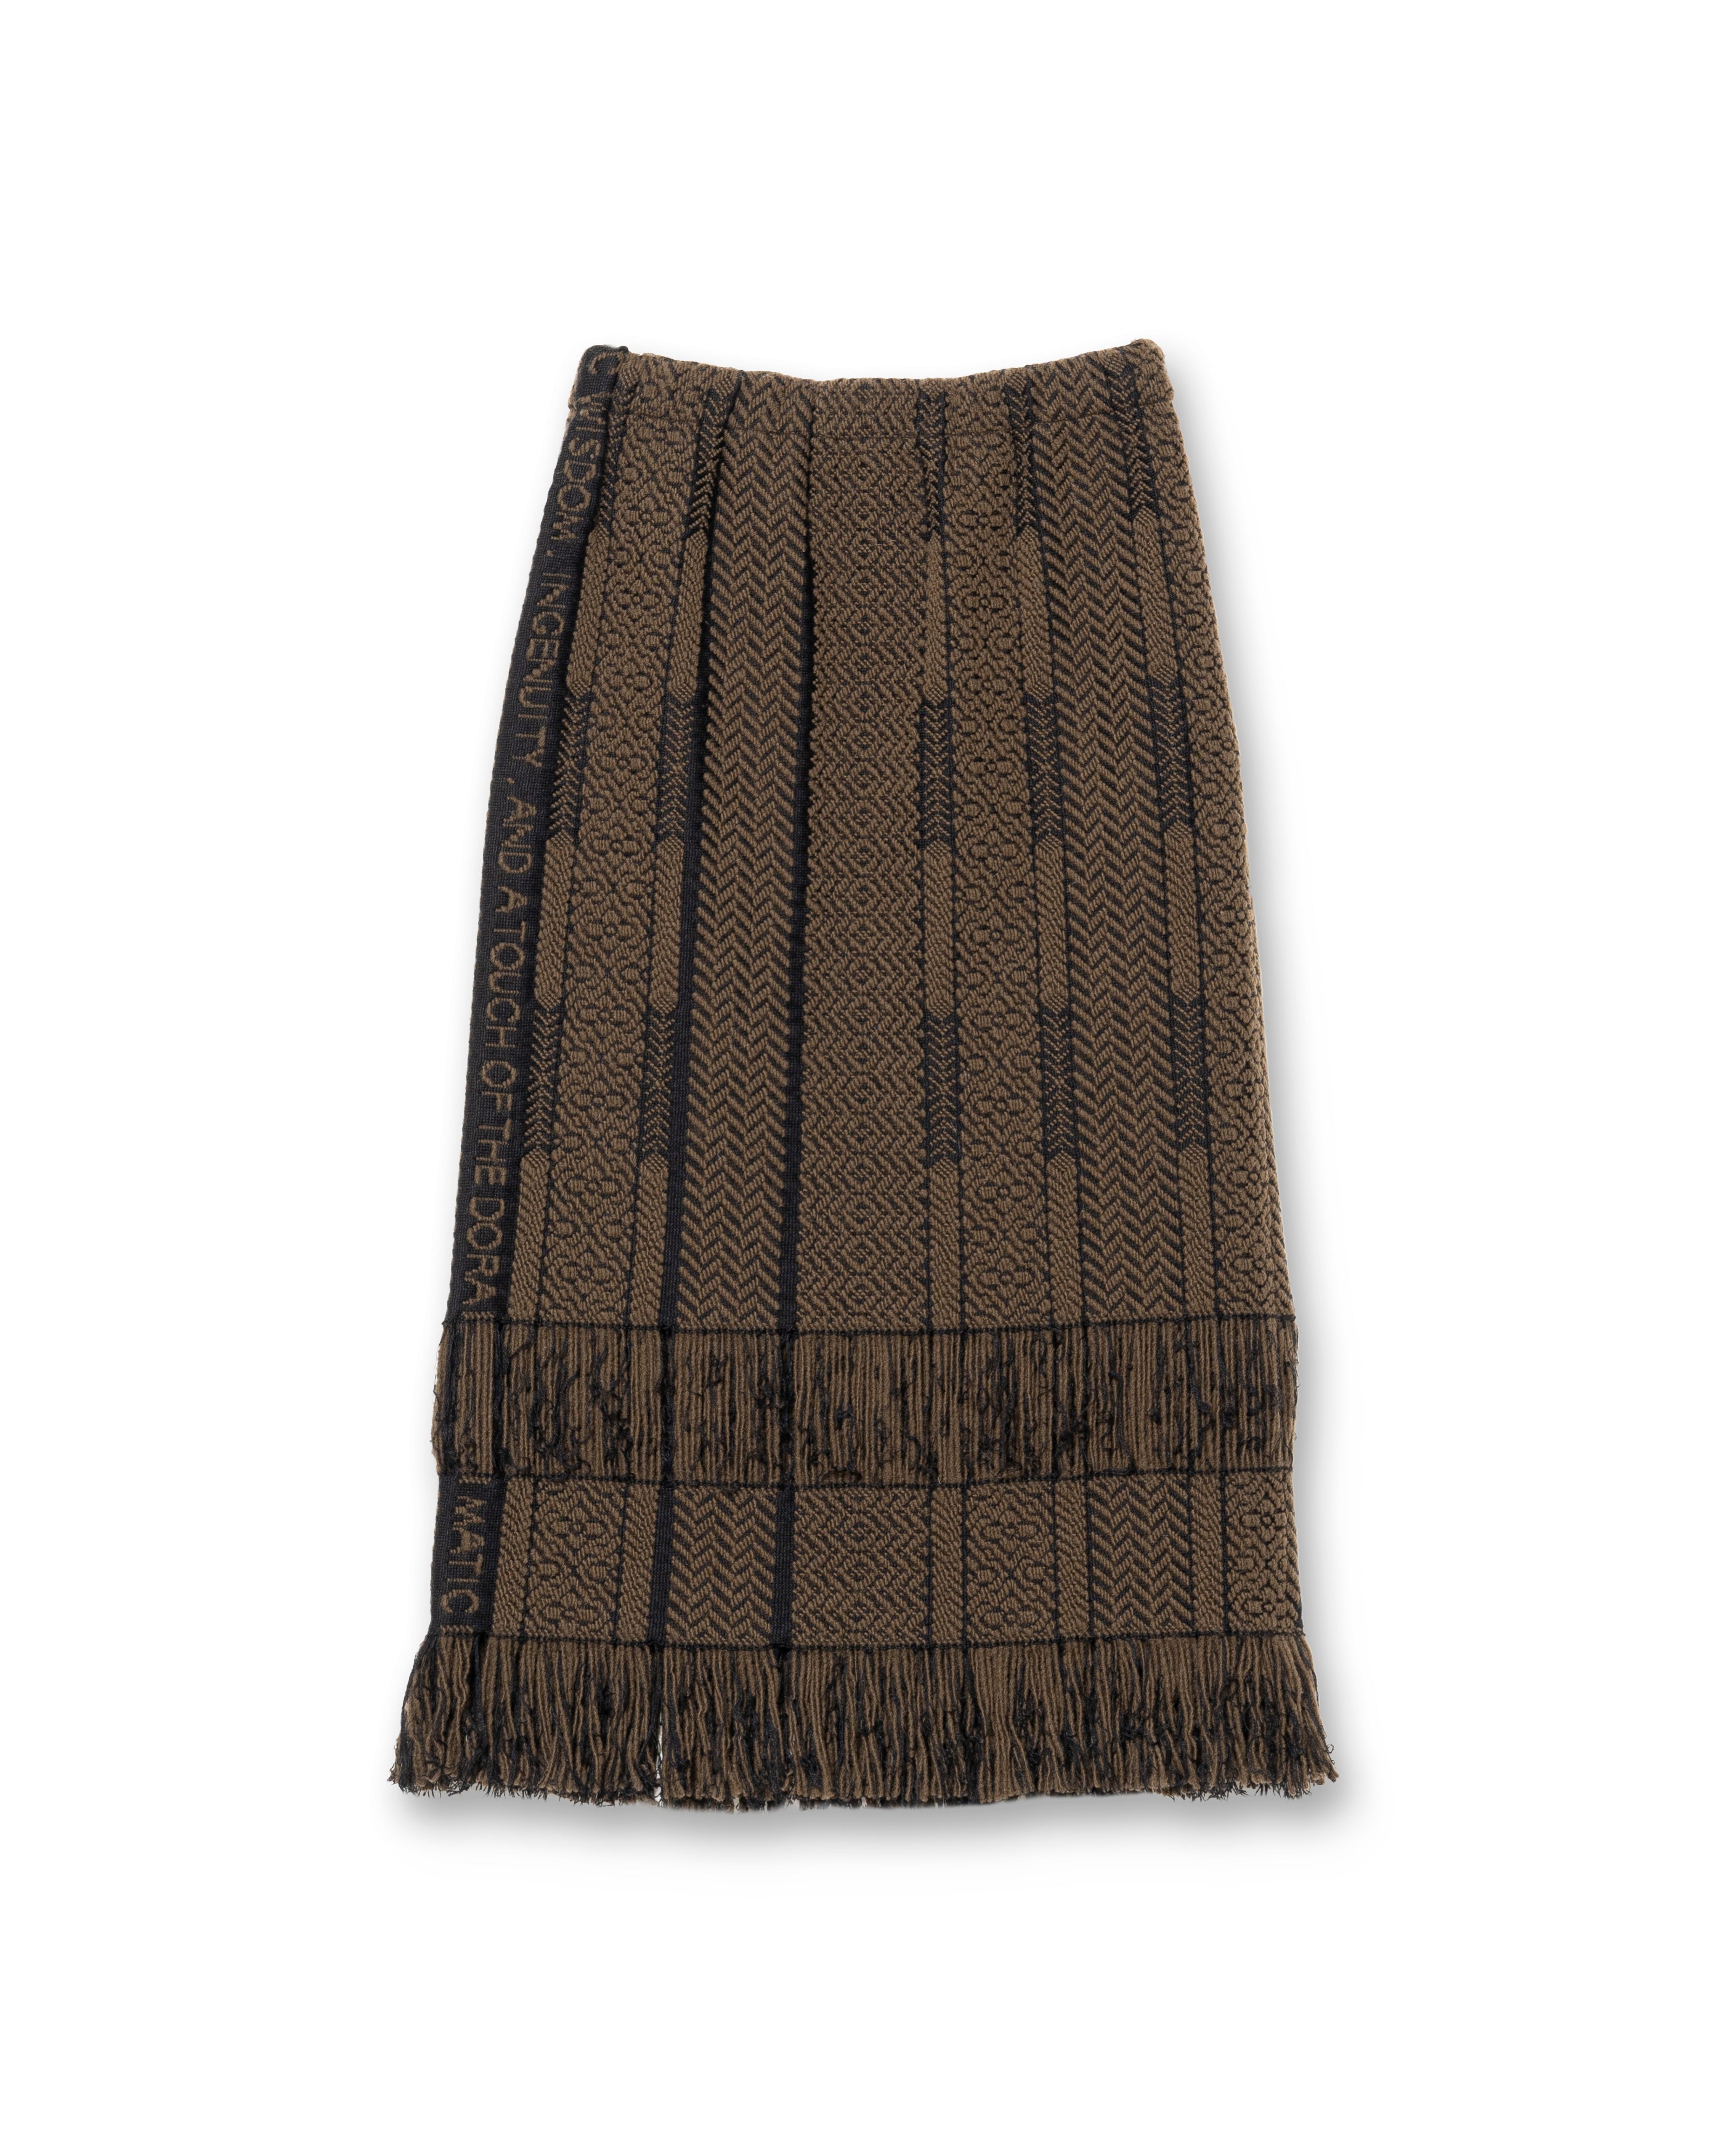 INLAY STITCH KNIT SKIRT [OLIVE BROWN]